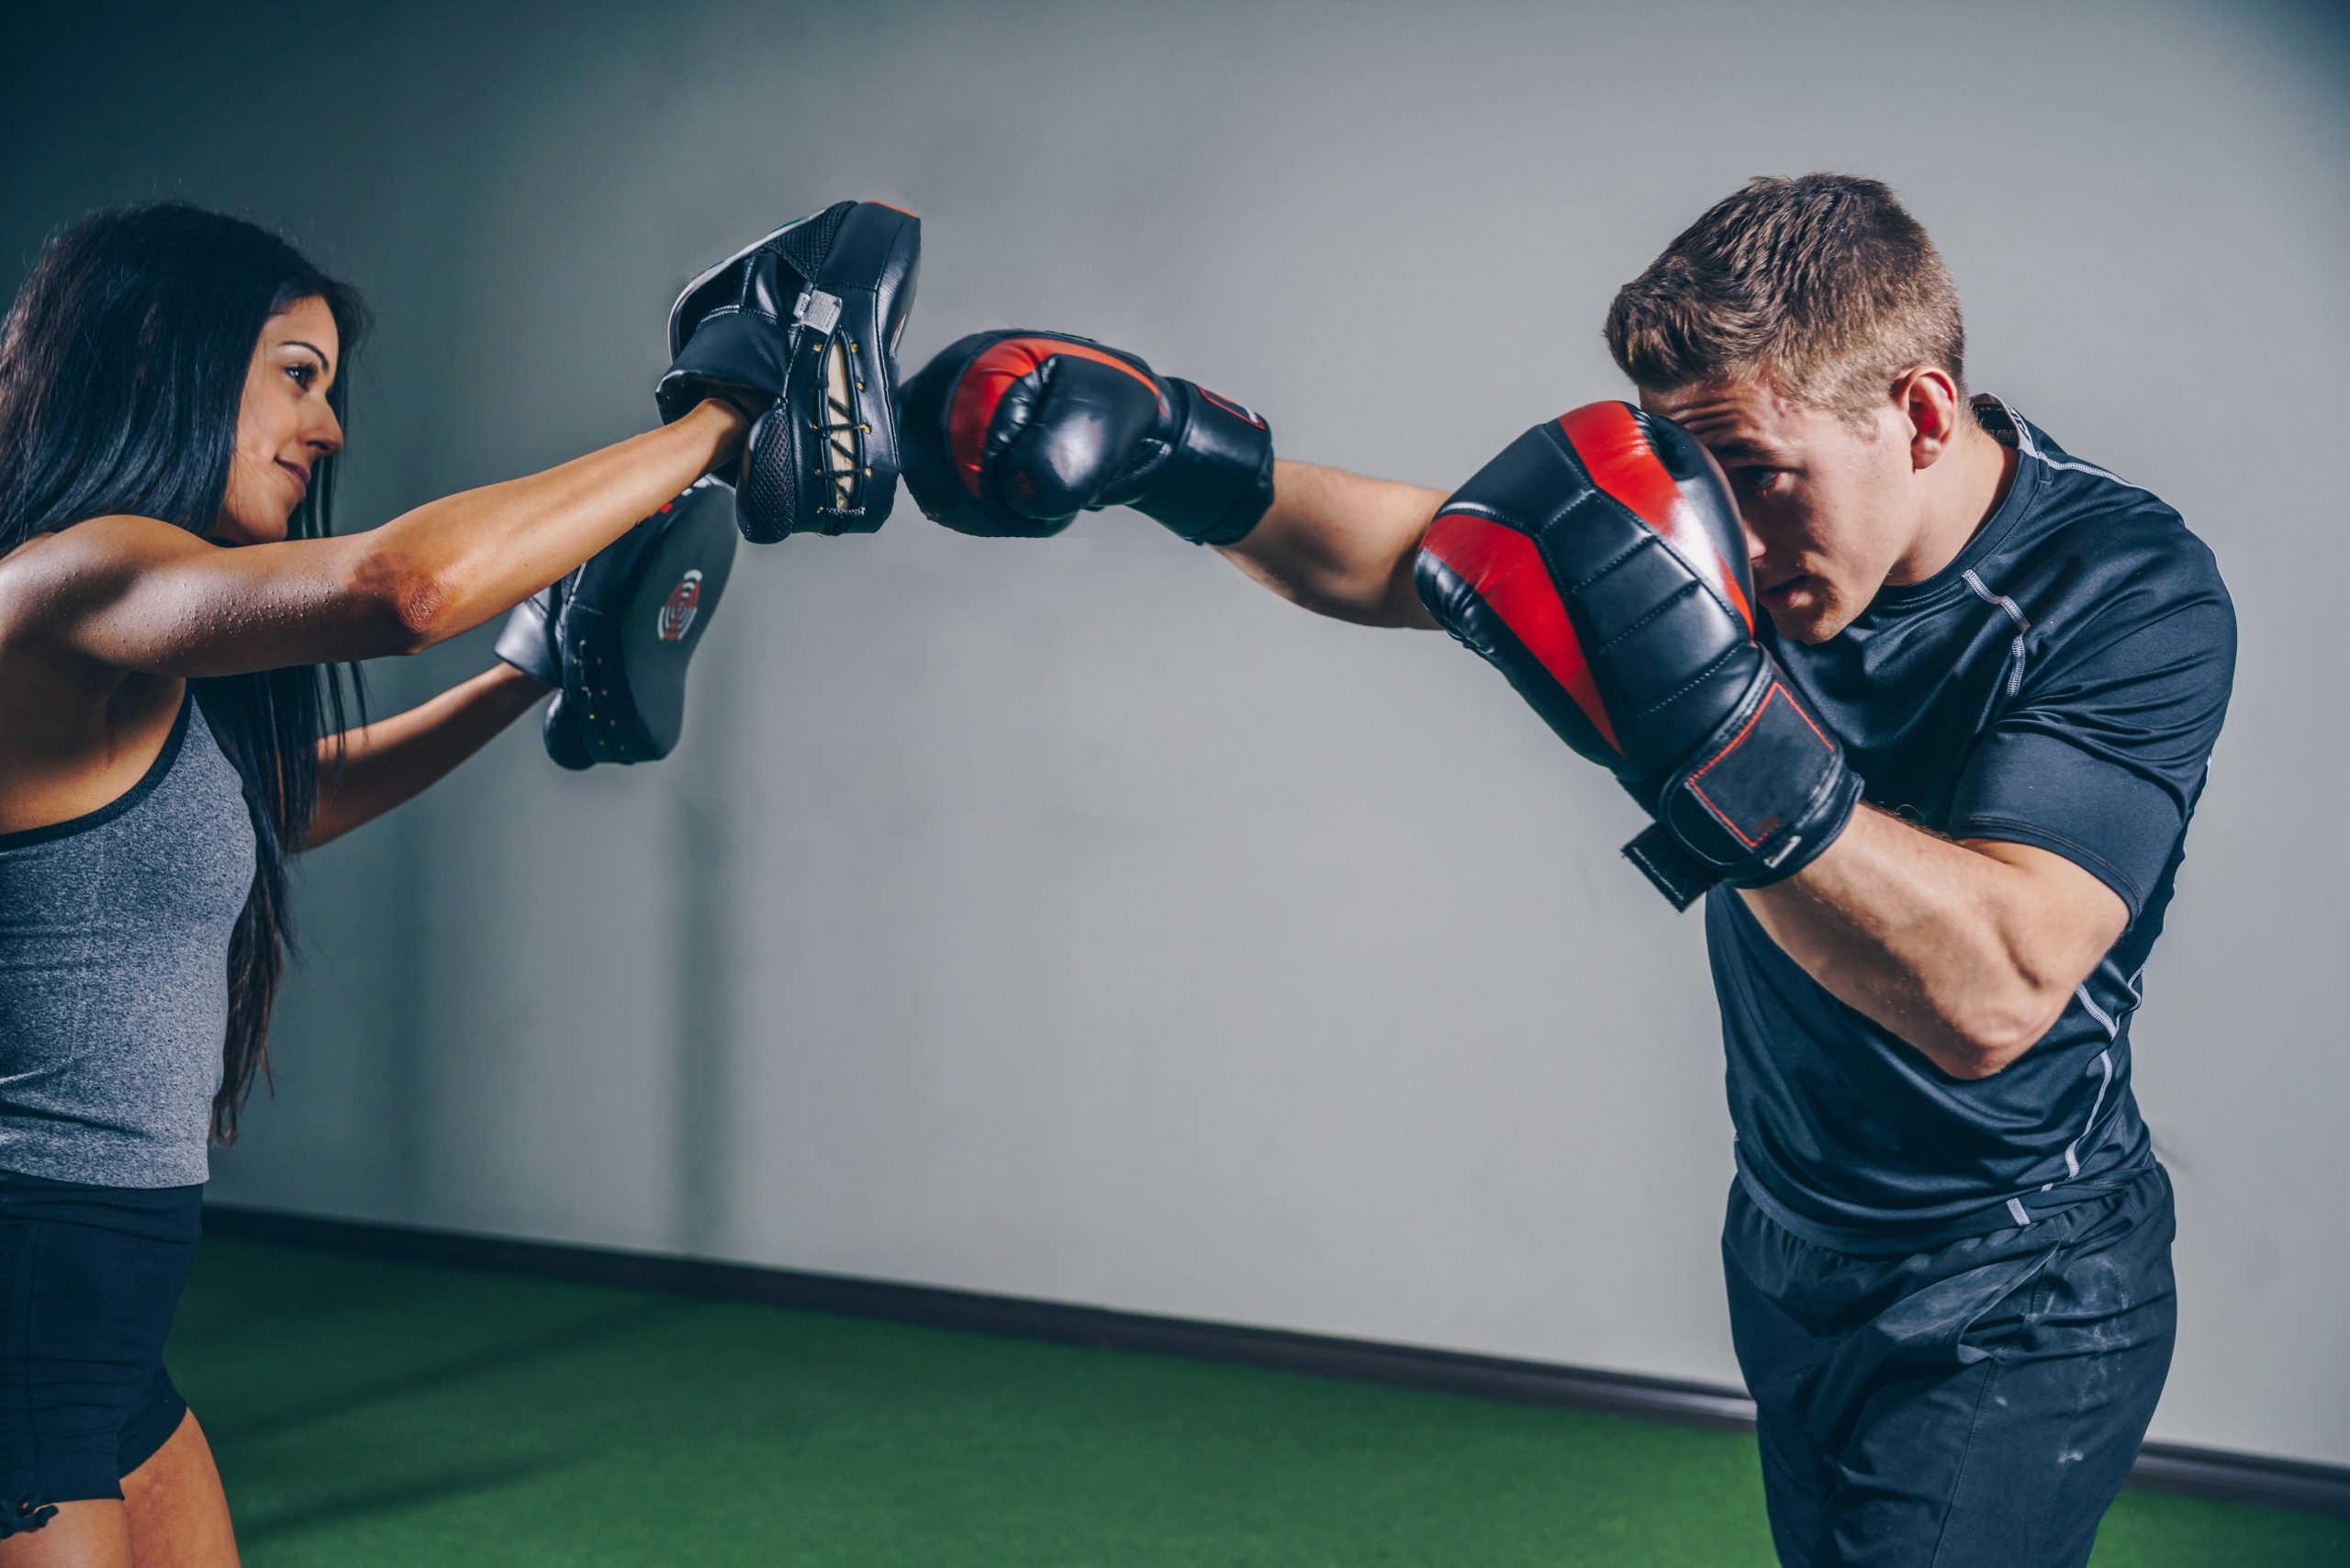 Essentials for Increasing Your Boxing Skills